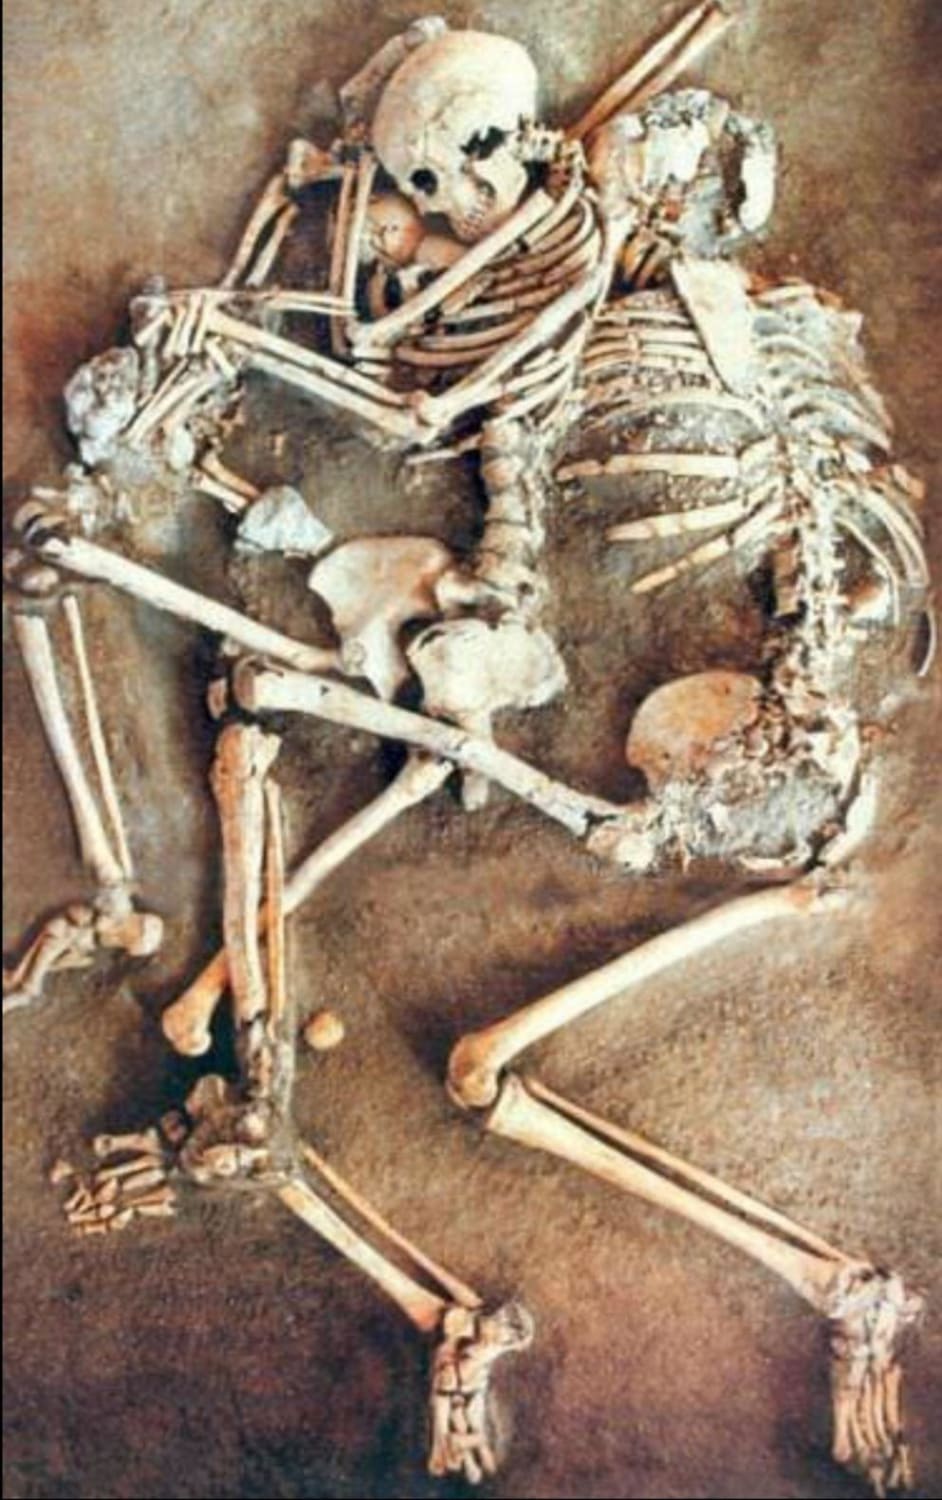 Eternally frozen in a protective embrace, the remains of an ancient family found in a Roman house in Kourion, which was destroyed in an earthquake in 365 CE. the skeletons found include a mother holding her child while the father tries to shield them both from collapsing walls